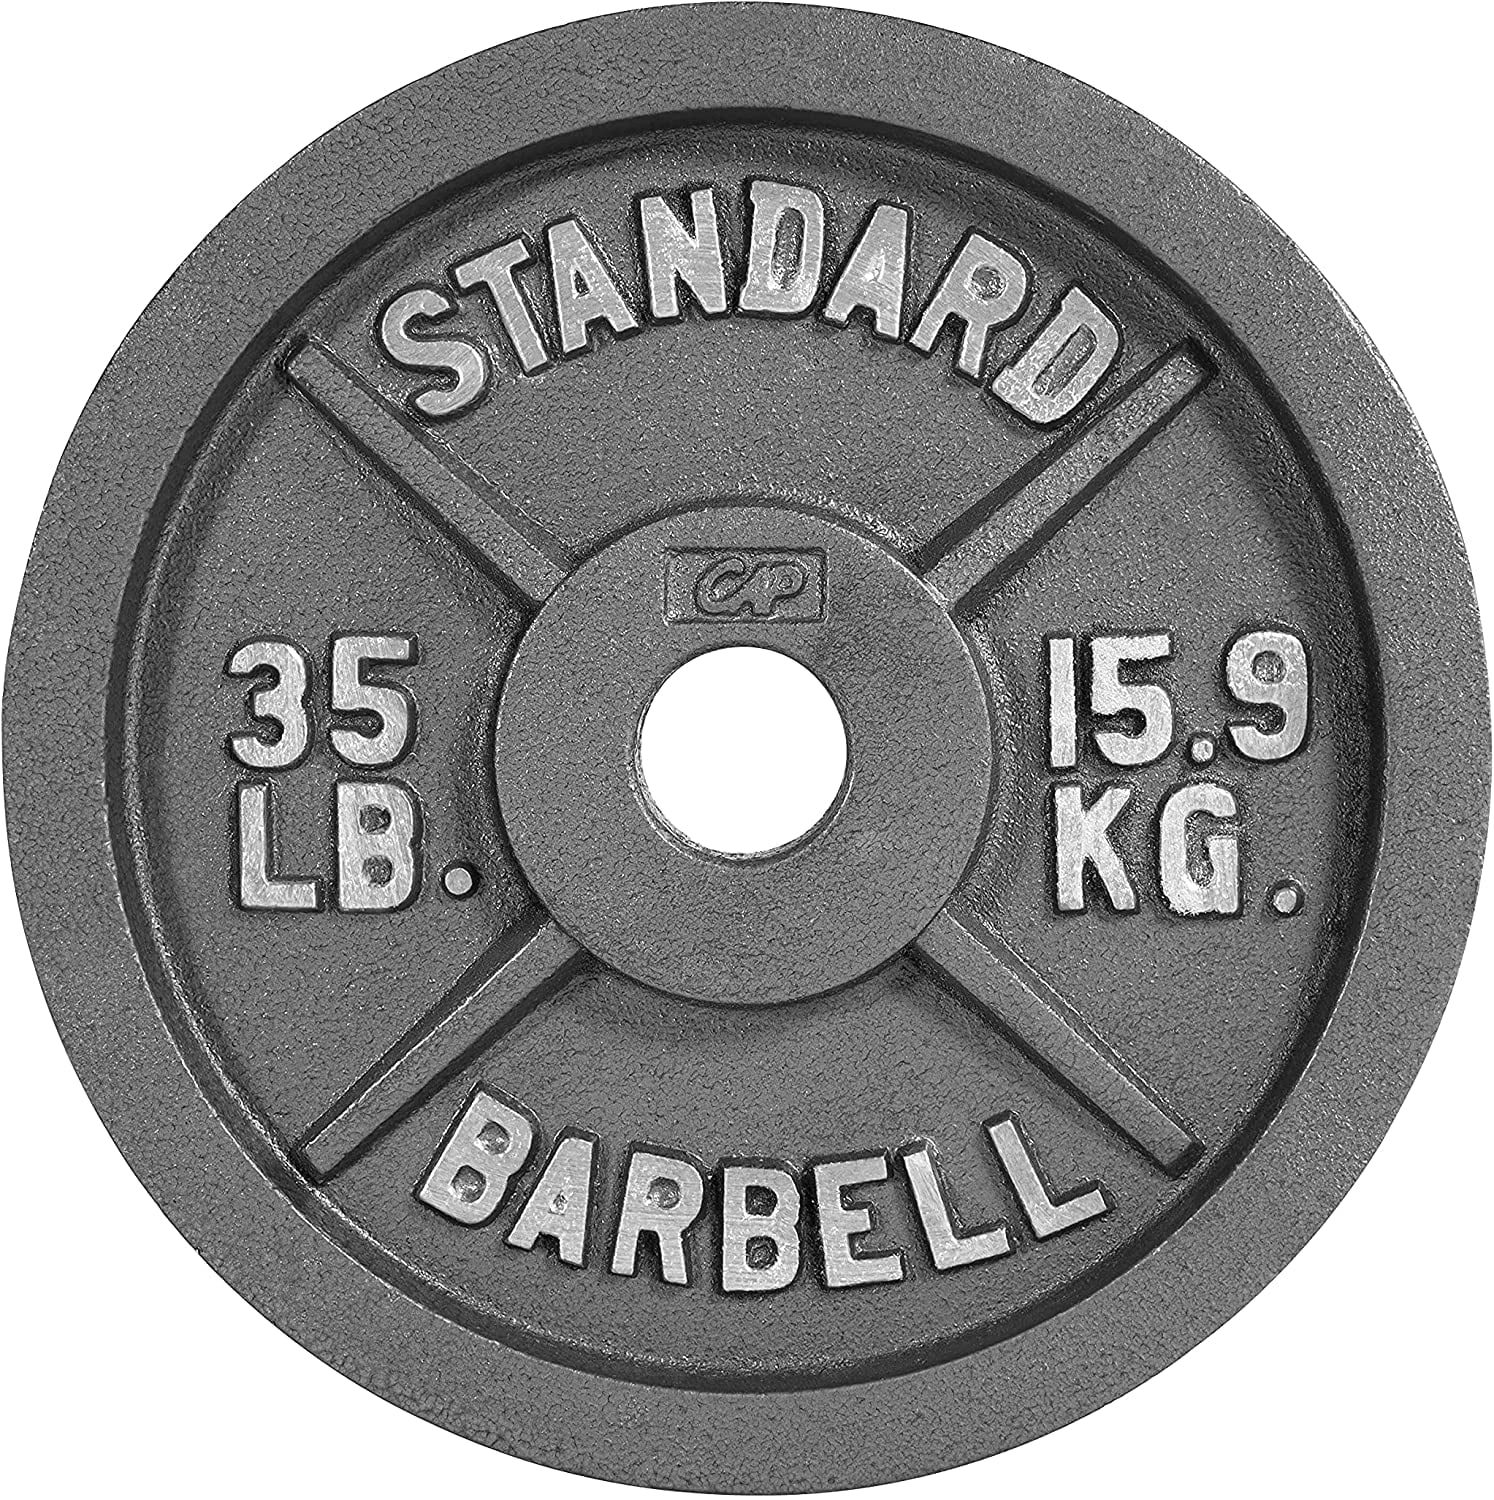 Weightlifting WF Athletic Supply Traditional/Classic 1-inch Hole Standard Solid Cast Iron Weight Plates Bodybuilding & Powerlifting Great for Strength Training Multiple Choices Available 